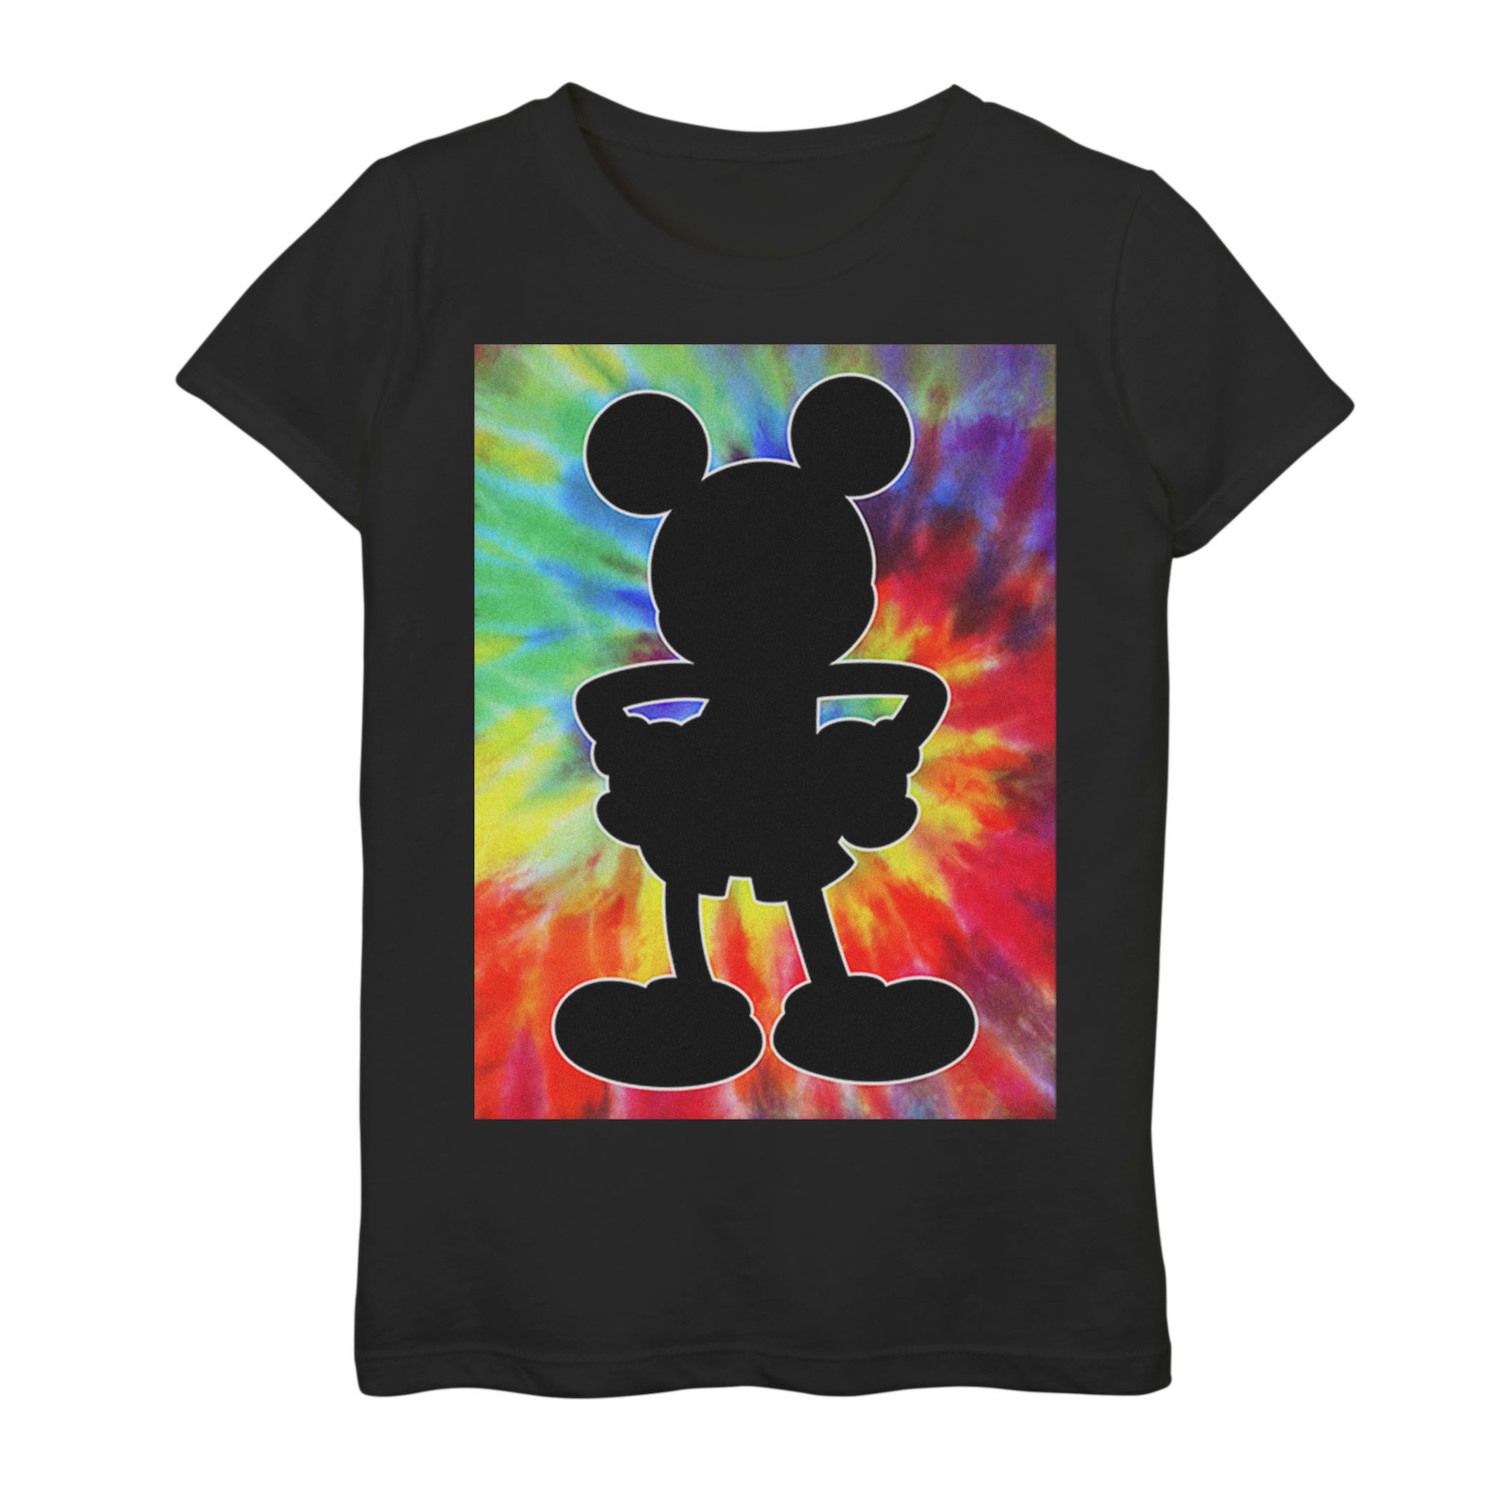 Image for Disney 's Mickey Mouse Girls 7-16 Tie Dye Silhouette Graphic Tee at Kohl's.